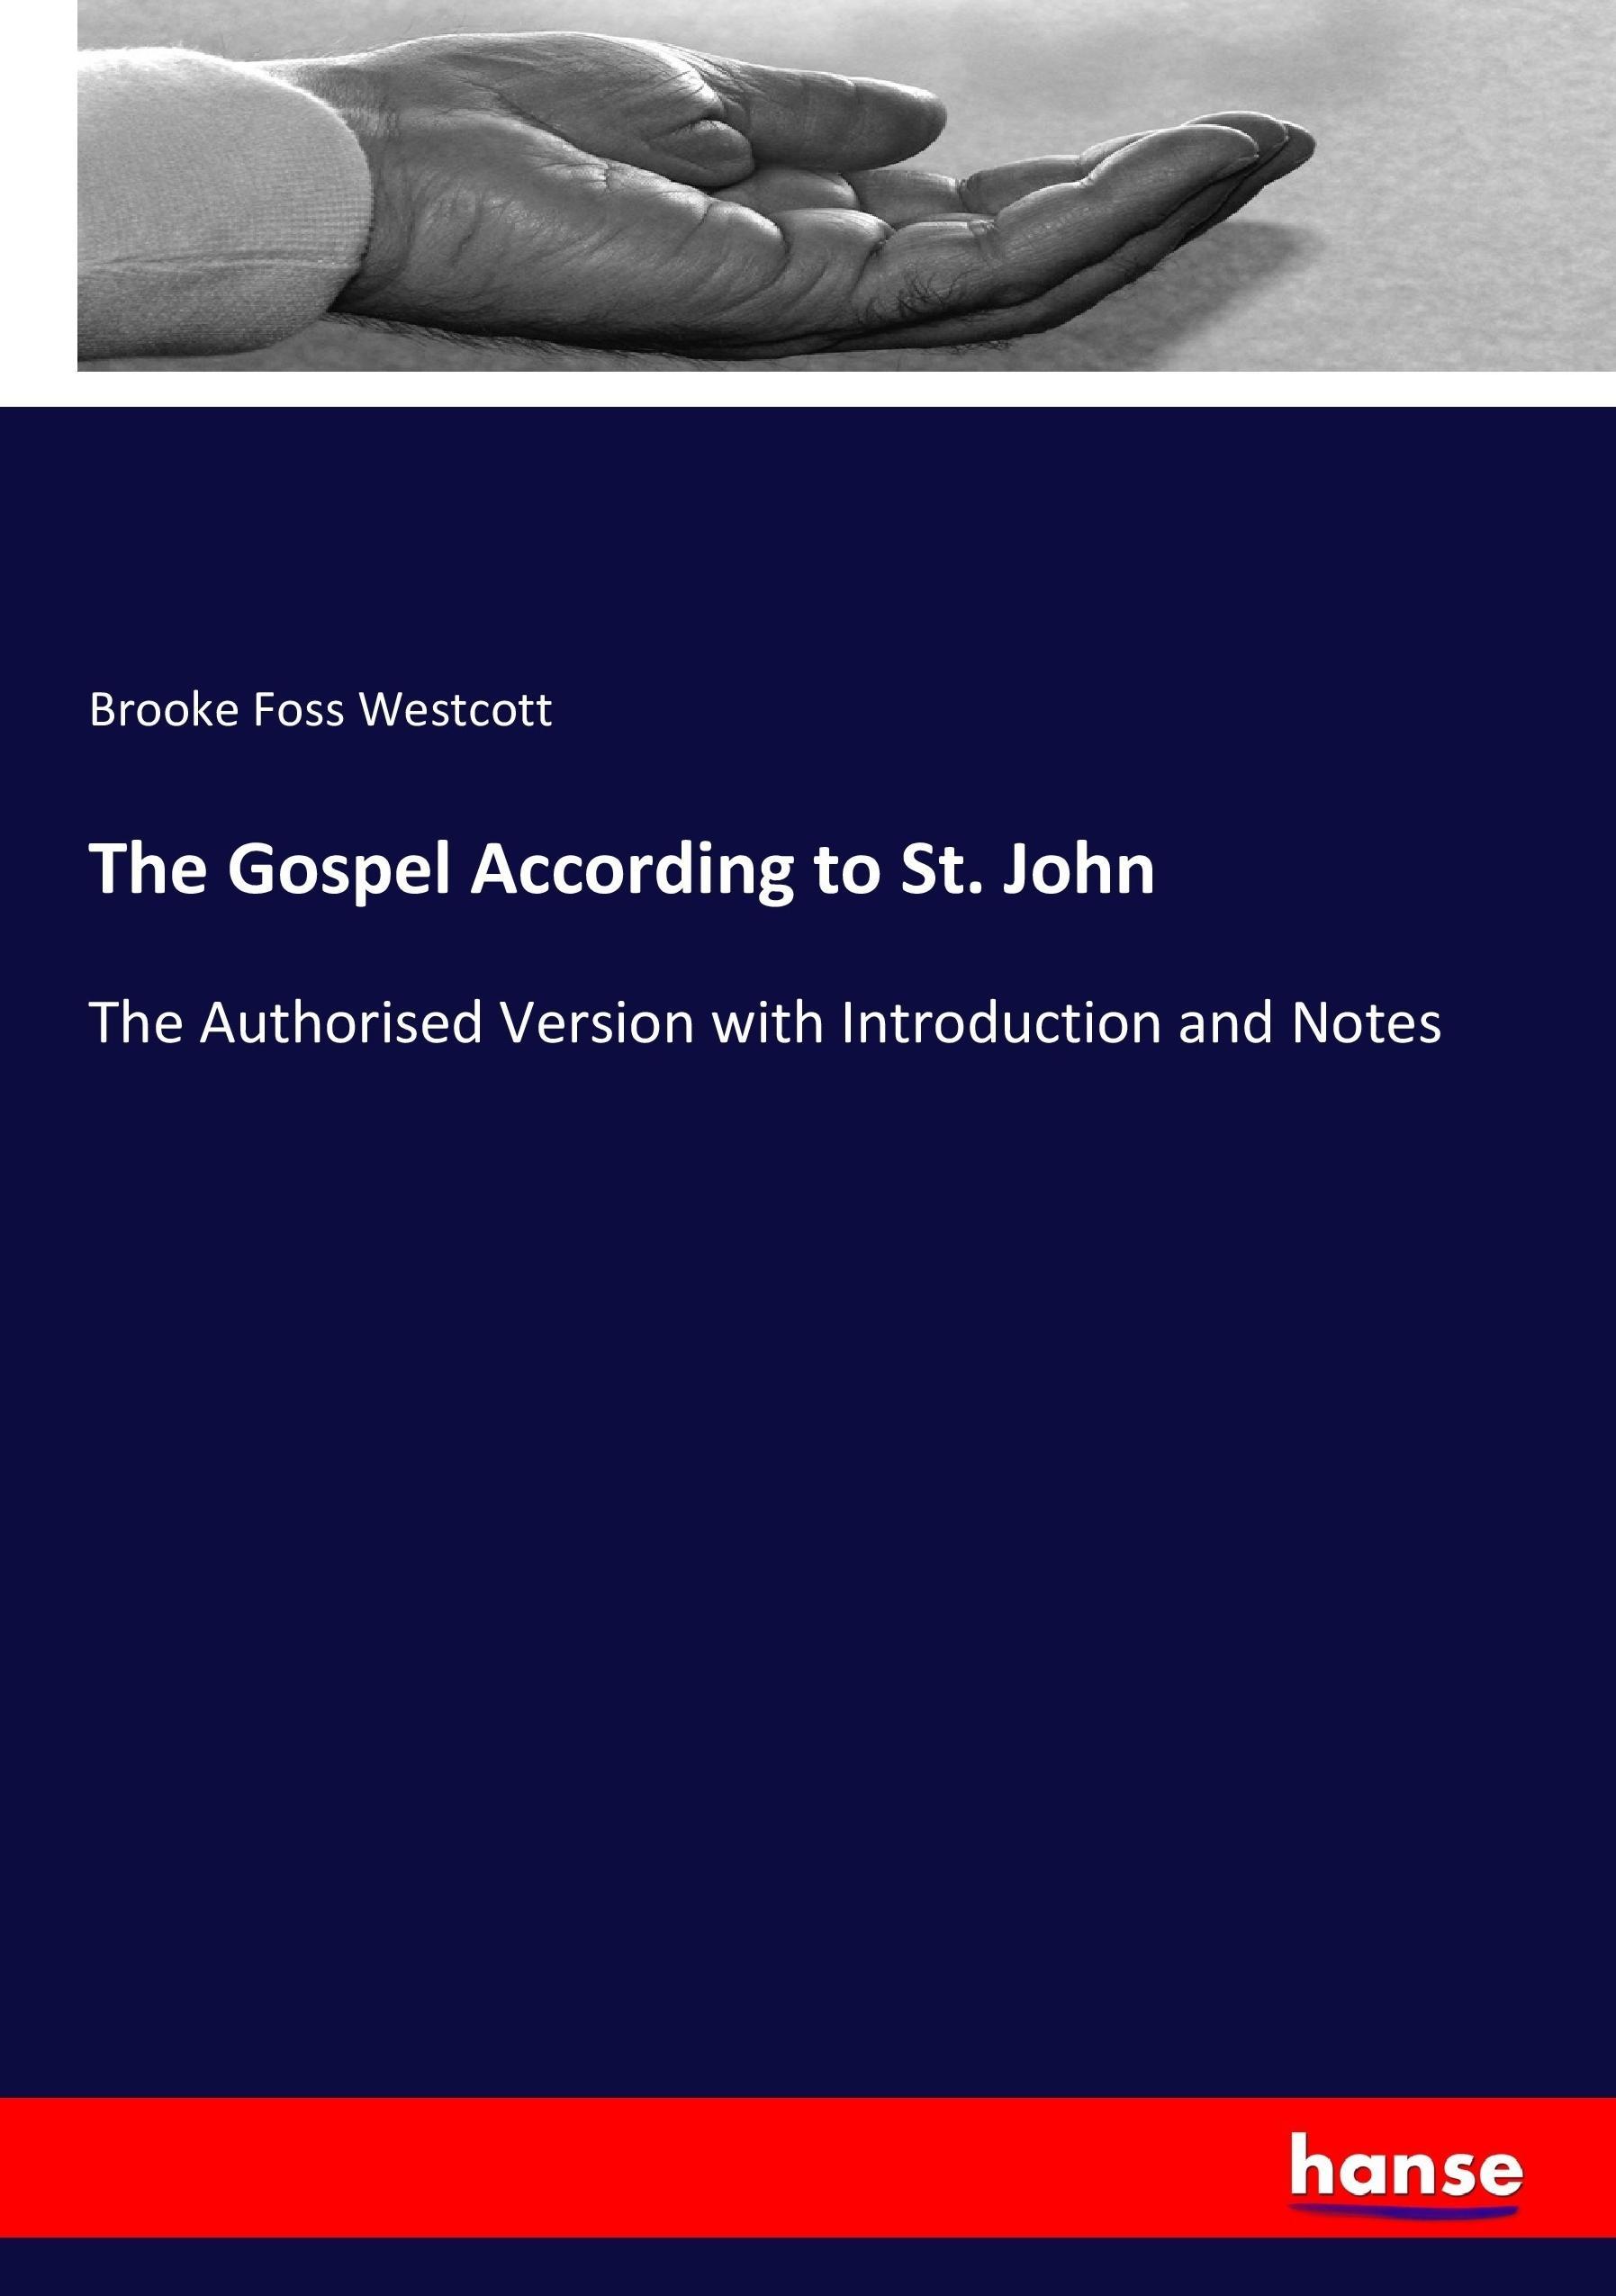 The Gospel According to St. John / The Authorised Version with Introduction and Notes / Brooke Foss Westcott / Taschenbuch / Paperback / 412 S. / Englisch / 2017 / hansebooks / EAN 9783337281014 - Westcott, Brooke Foss